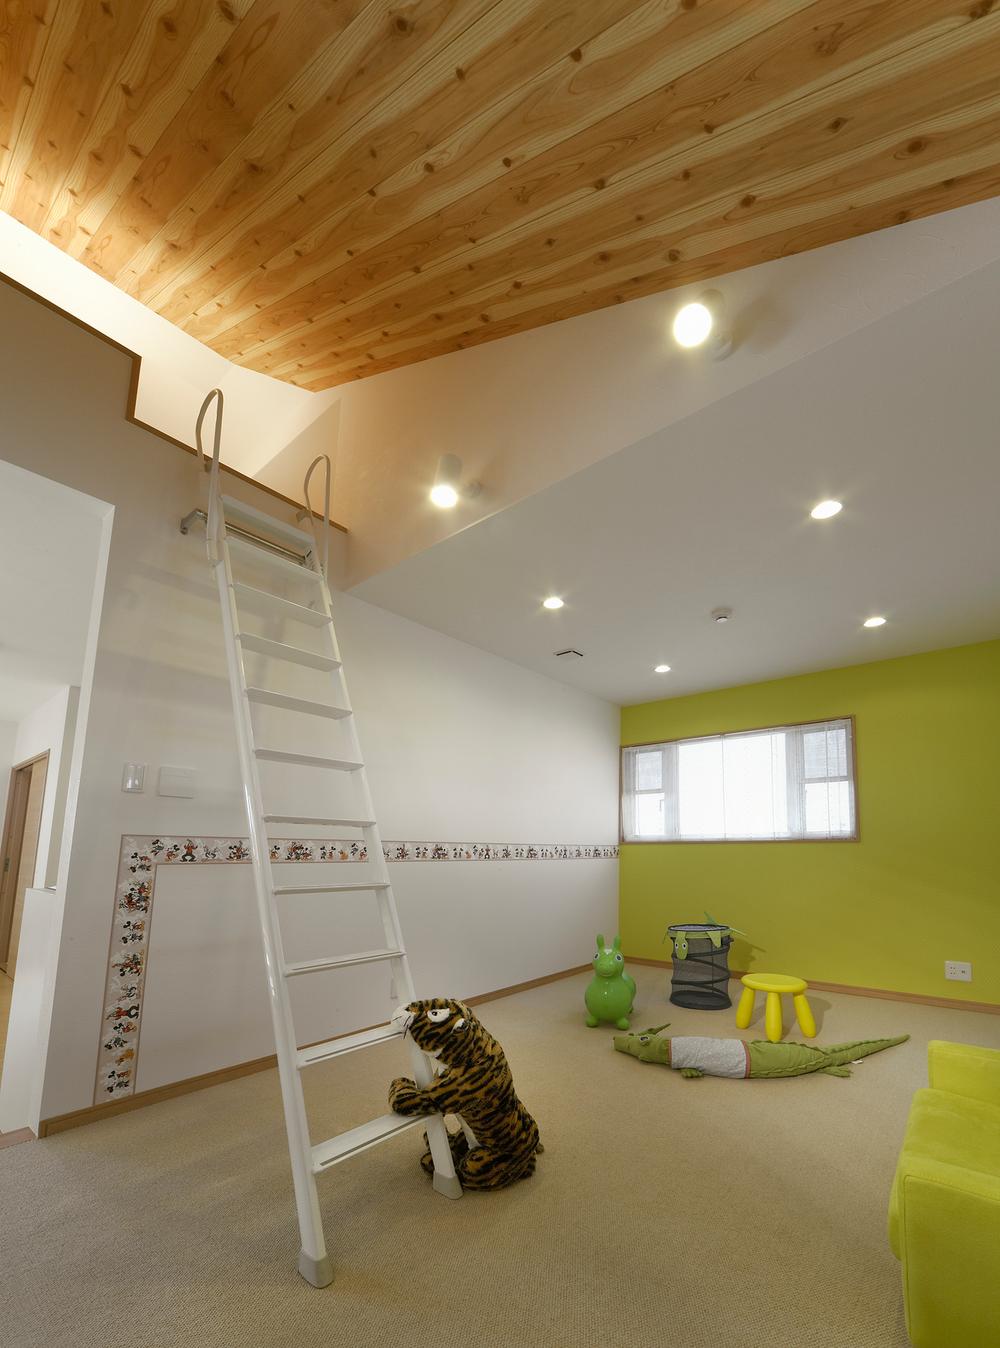 exhibition hall / Showroom. To cheerfully carefree To grow up children, There and happy Children's Room. It is safe design that reaches the eyes of the mom from the kitchen from the living room. Because with loft, Shimae a lot of goods of toys and memories. (exhibition hall)